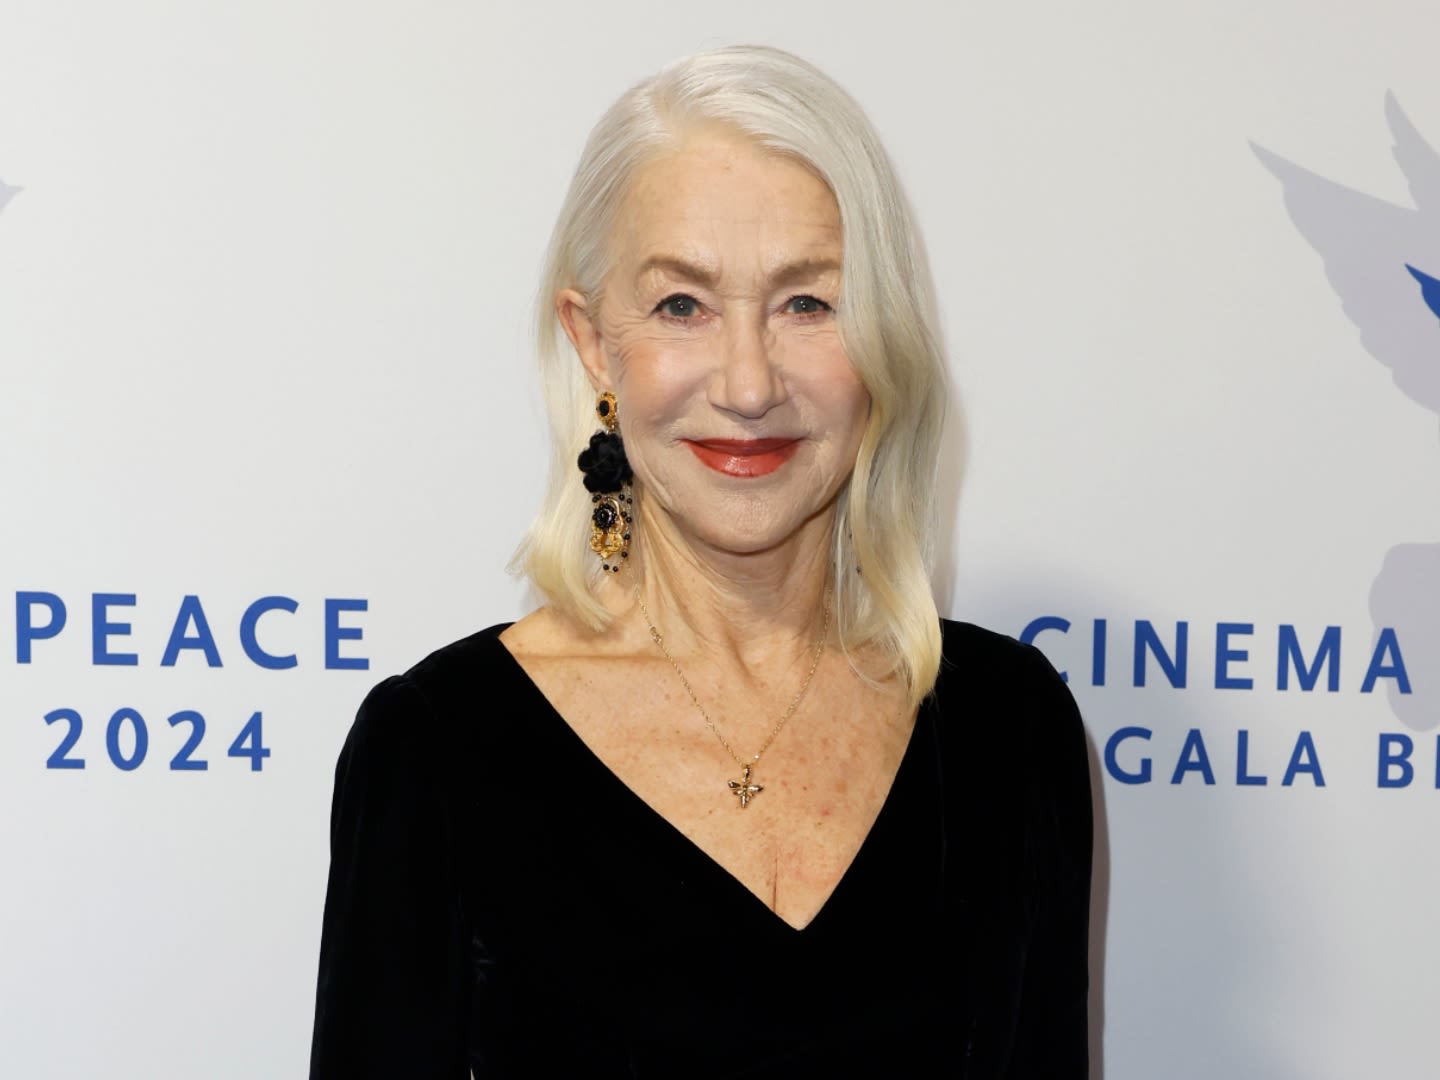 Shoppers Say This Helen Mirren-Approved Brand's $10 Foundation Gives Their Skin ‘the Glow of a 30-Year-Old’